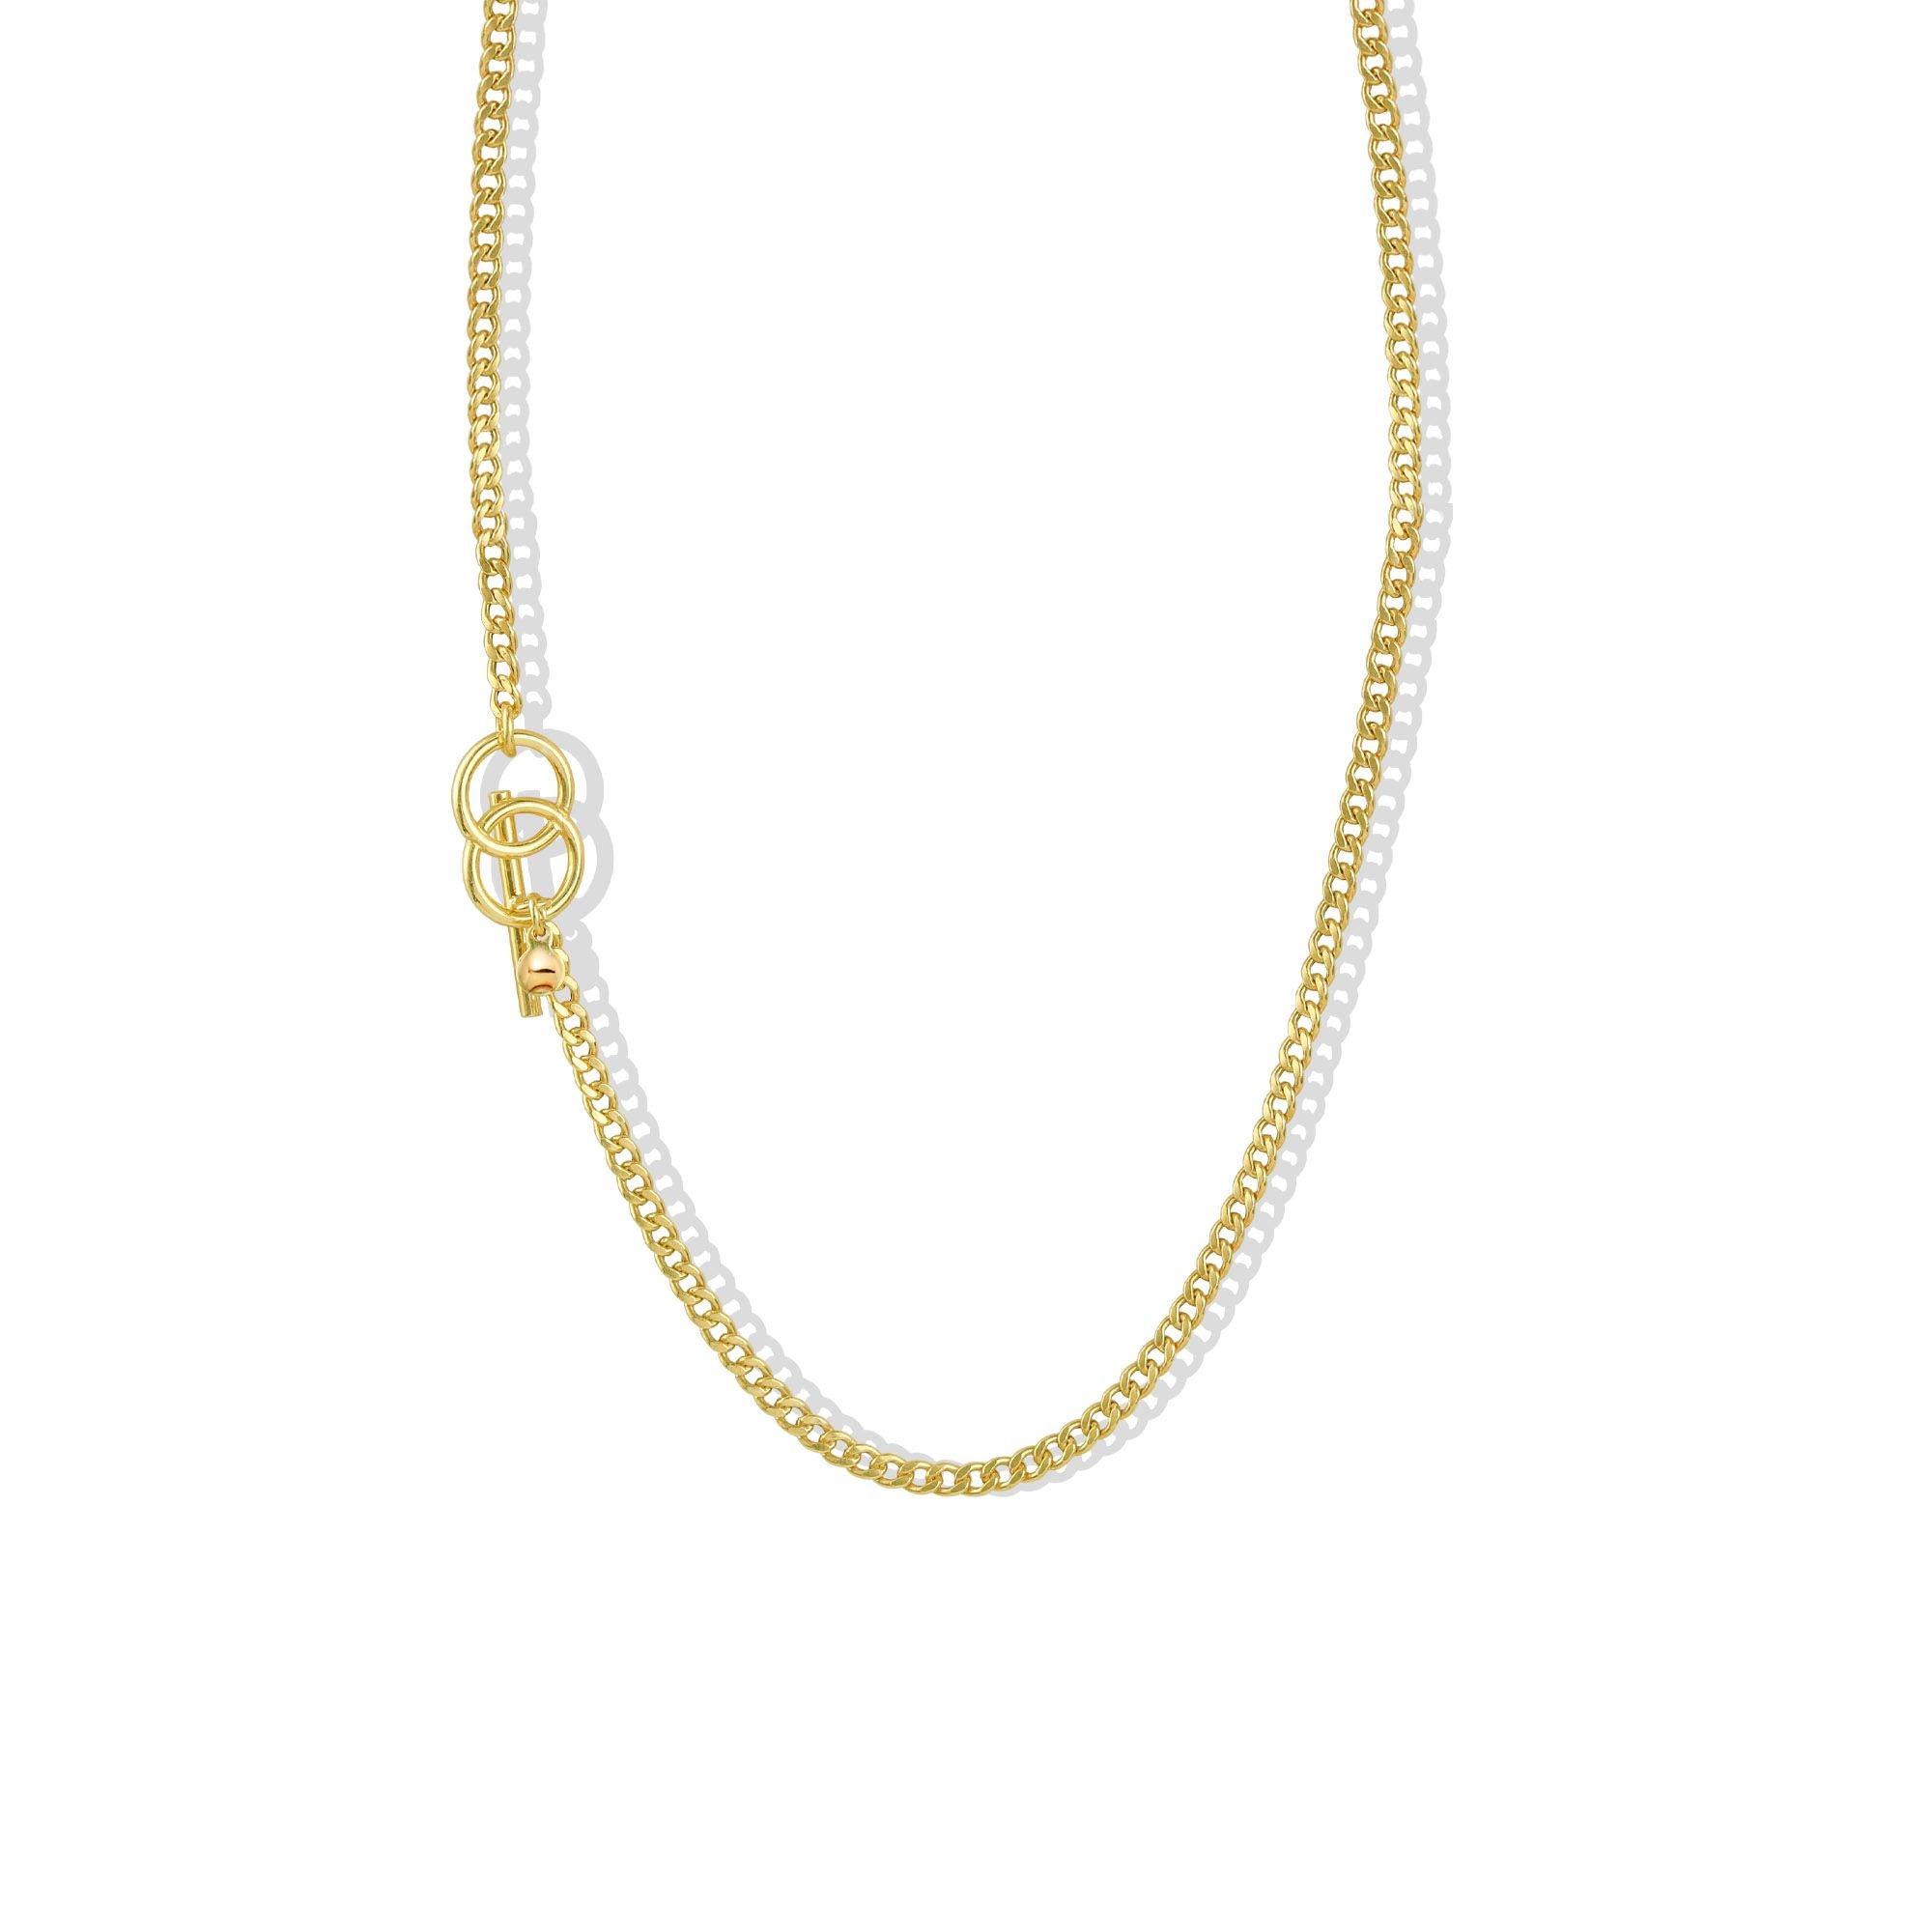 THE ROXE CHAIN NECKLACE